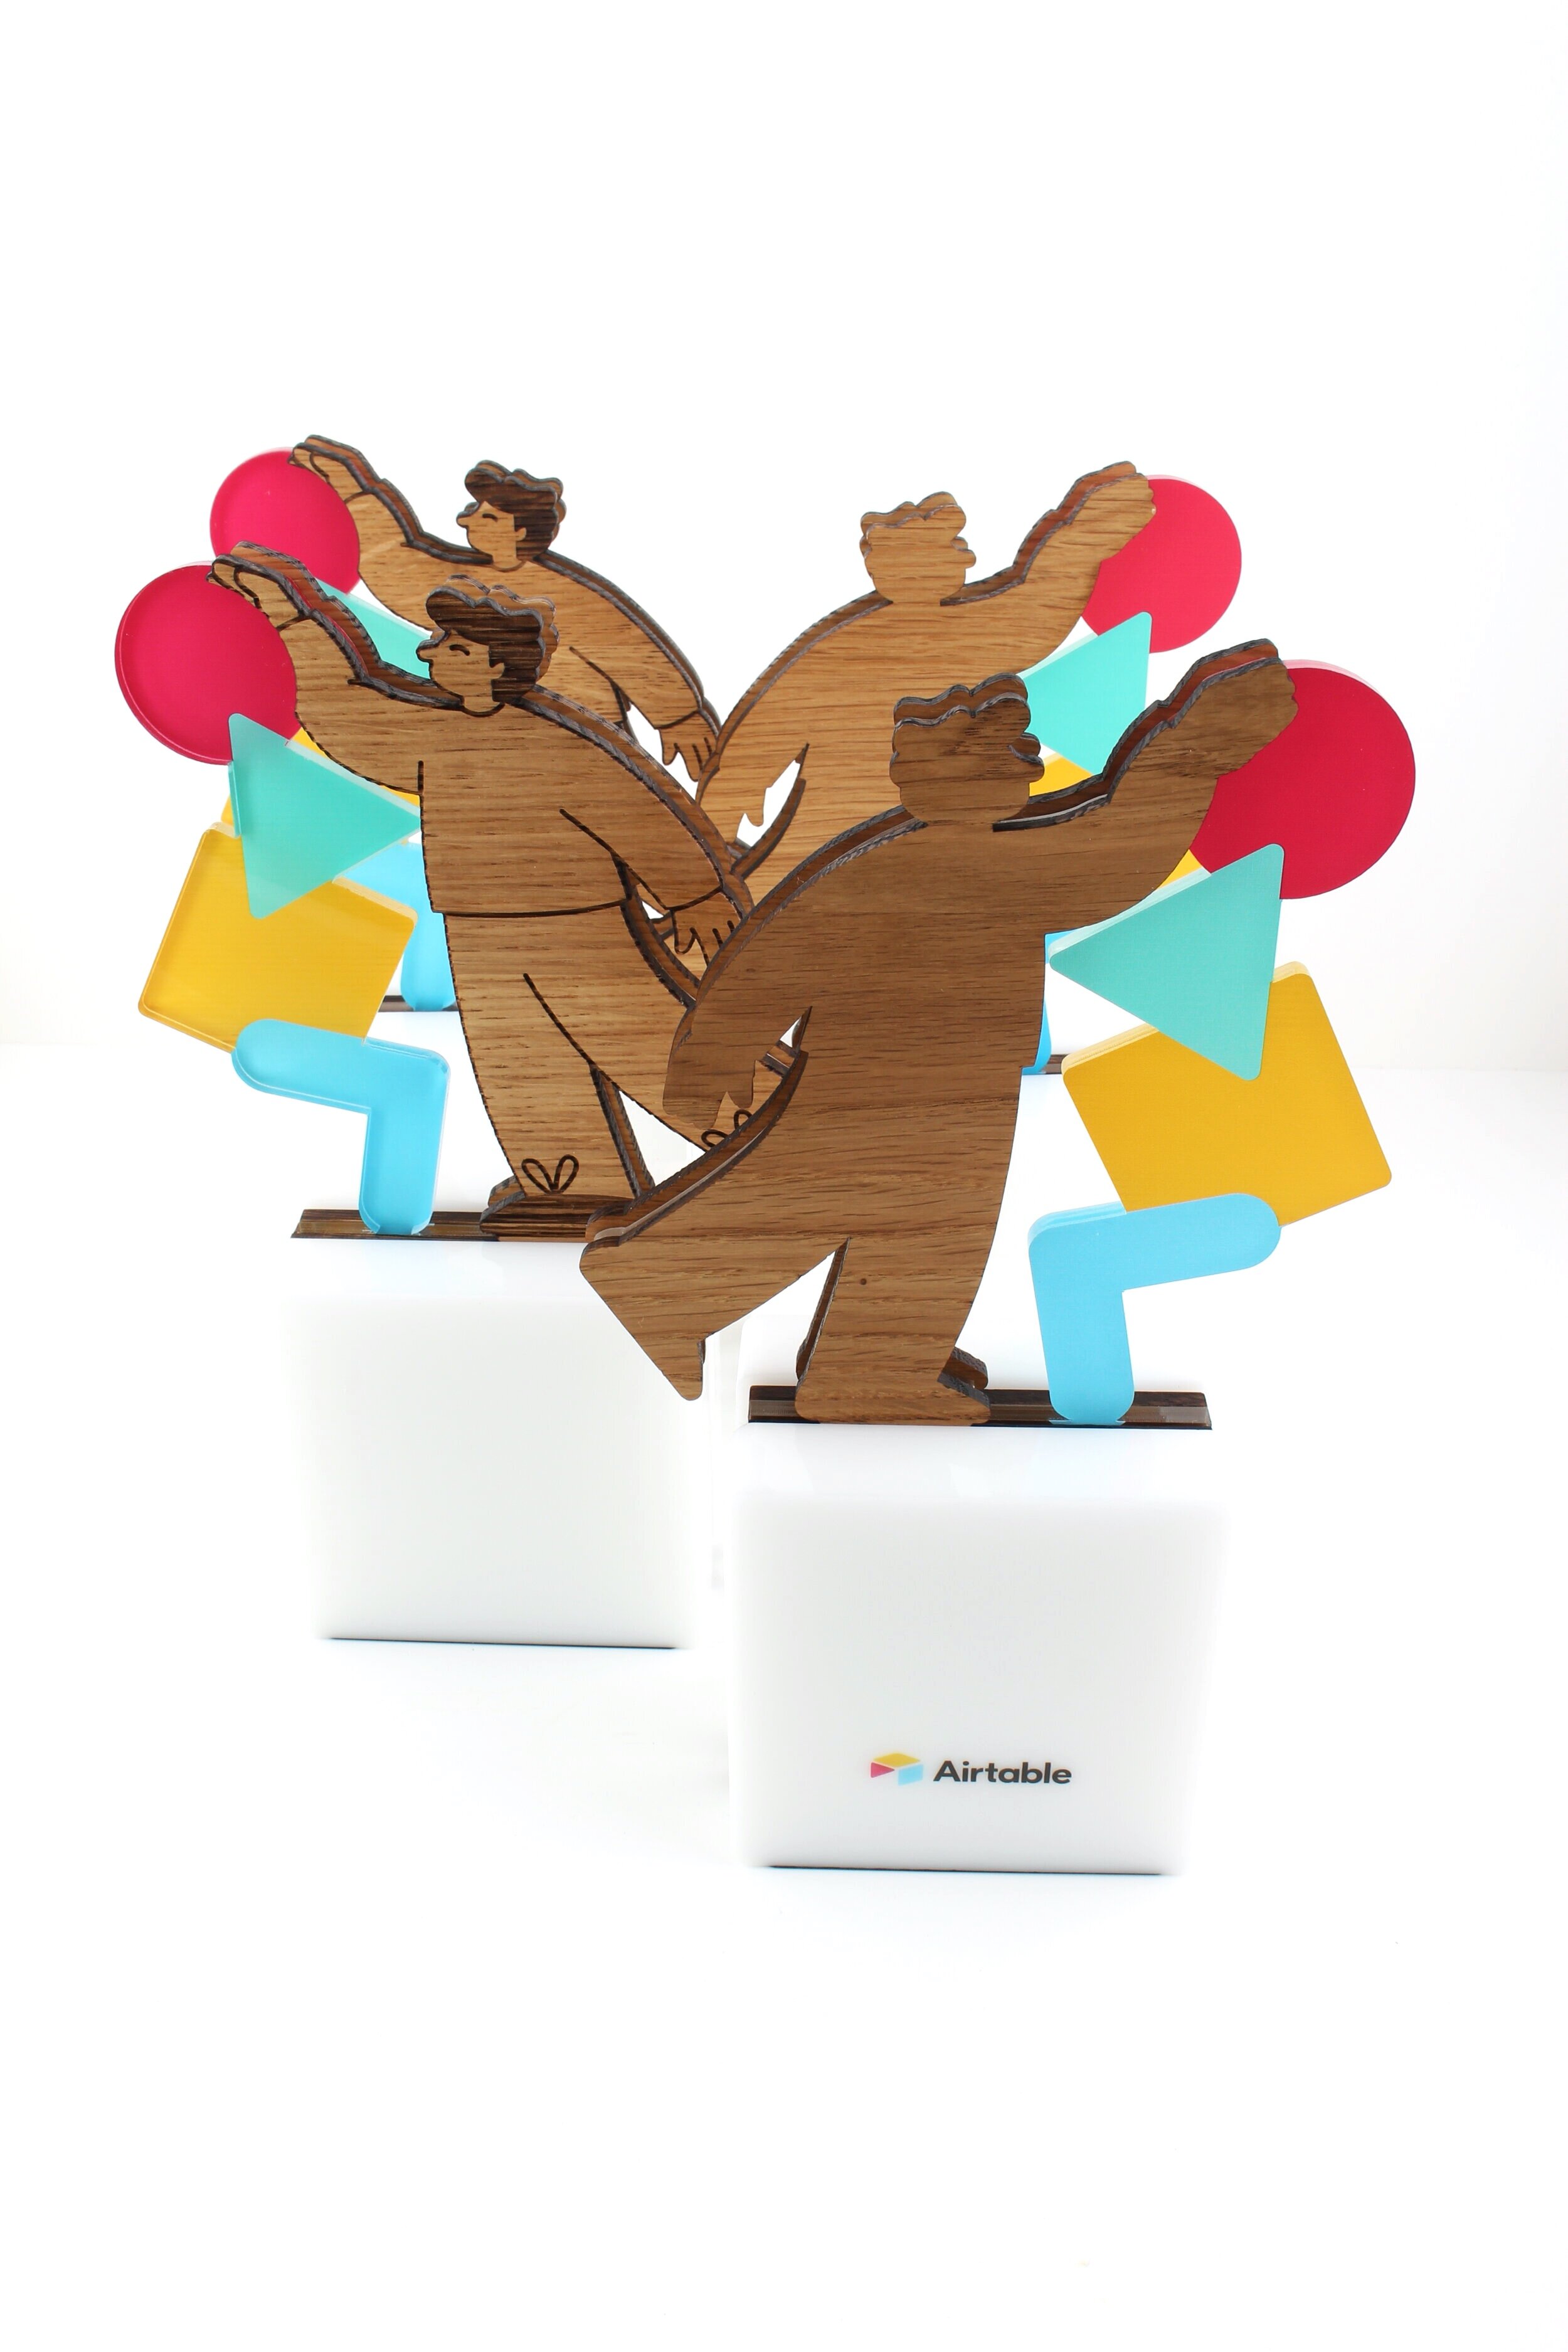 airtable silicon valley awards trophies custom design